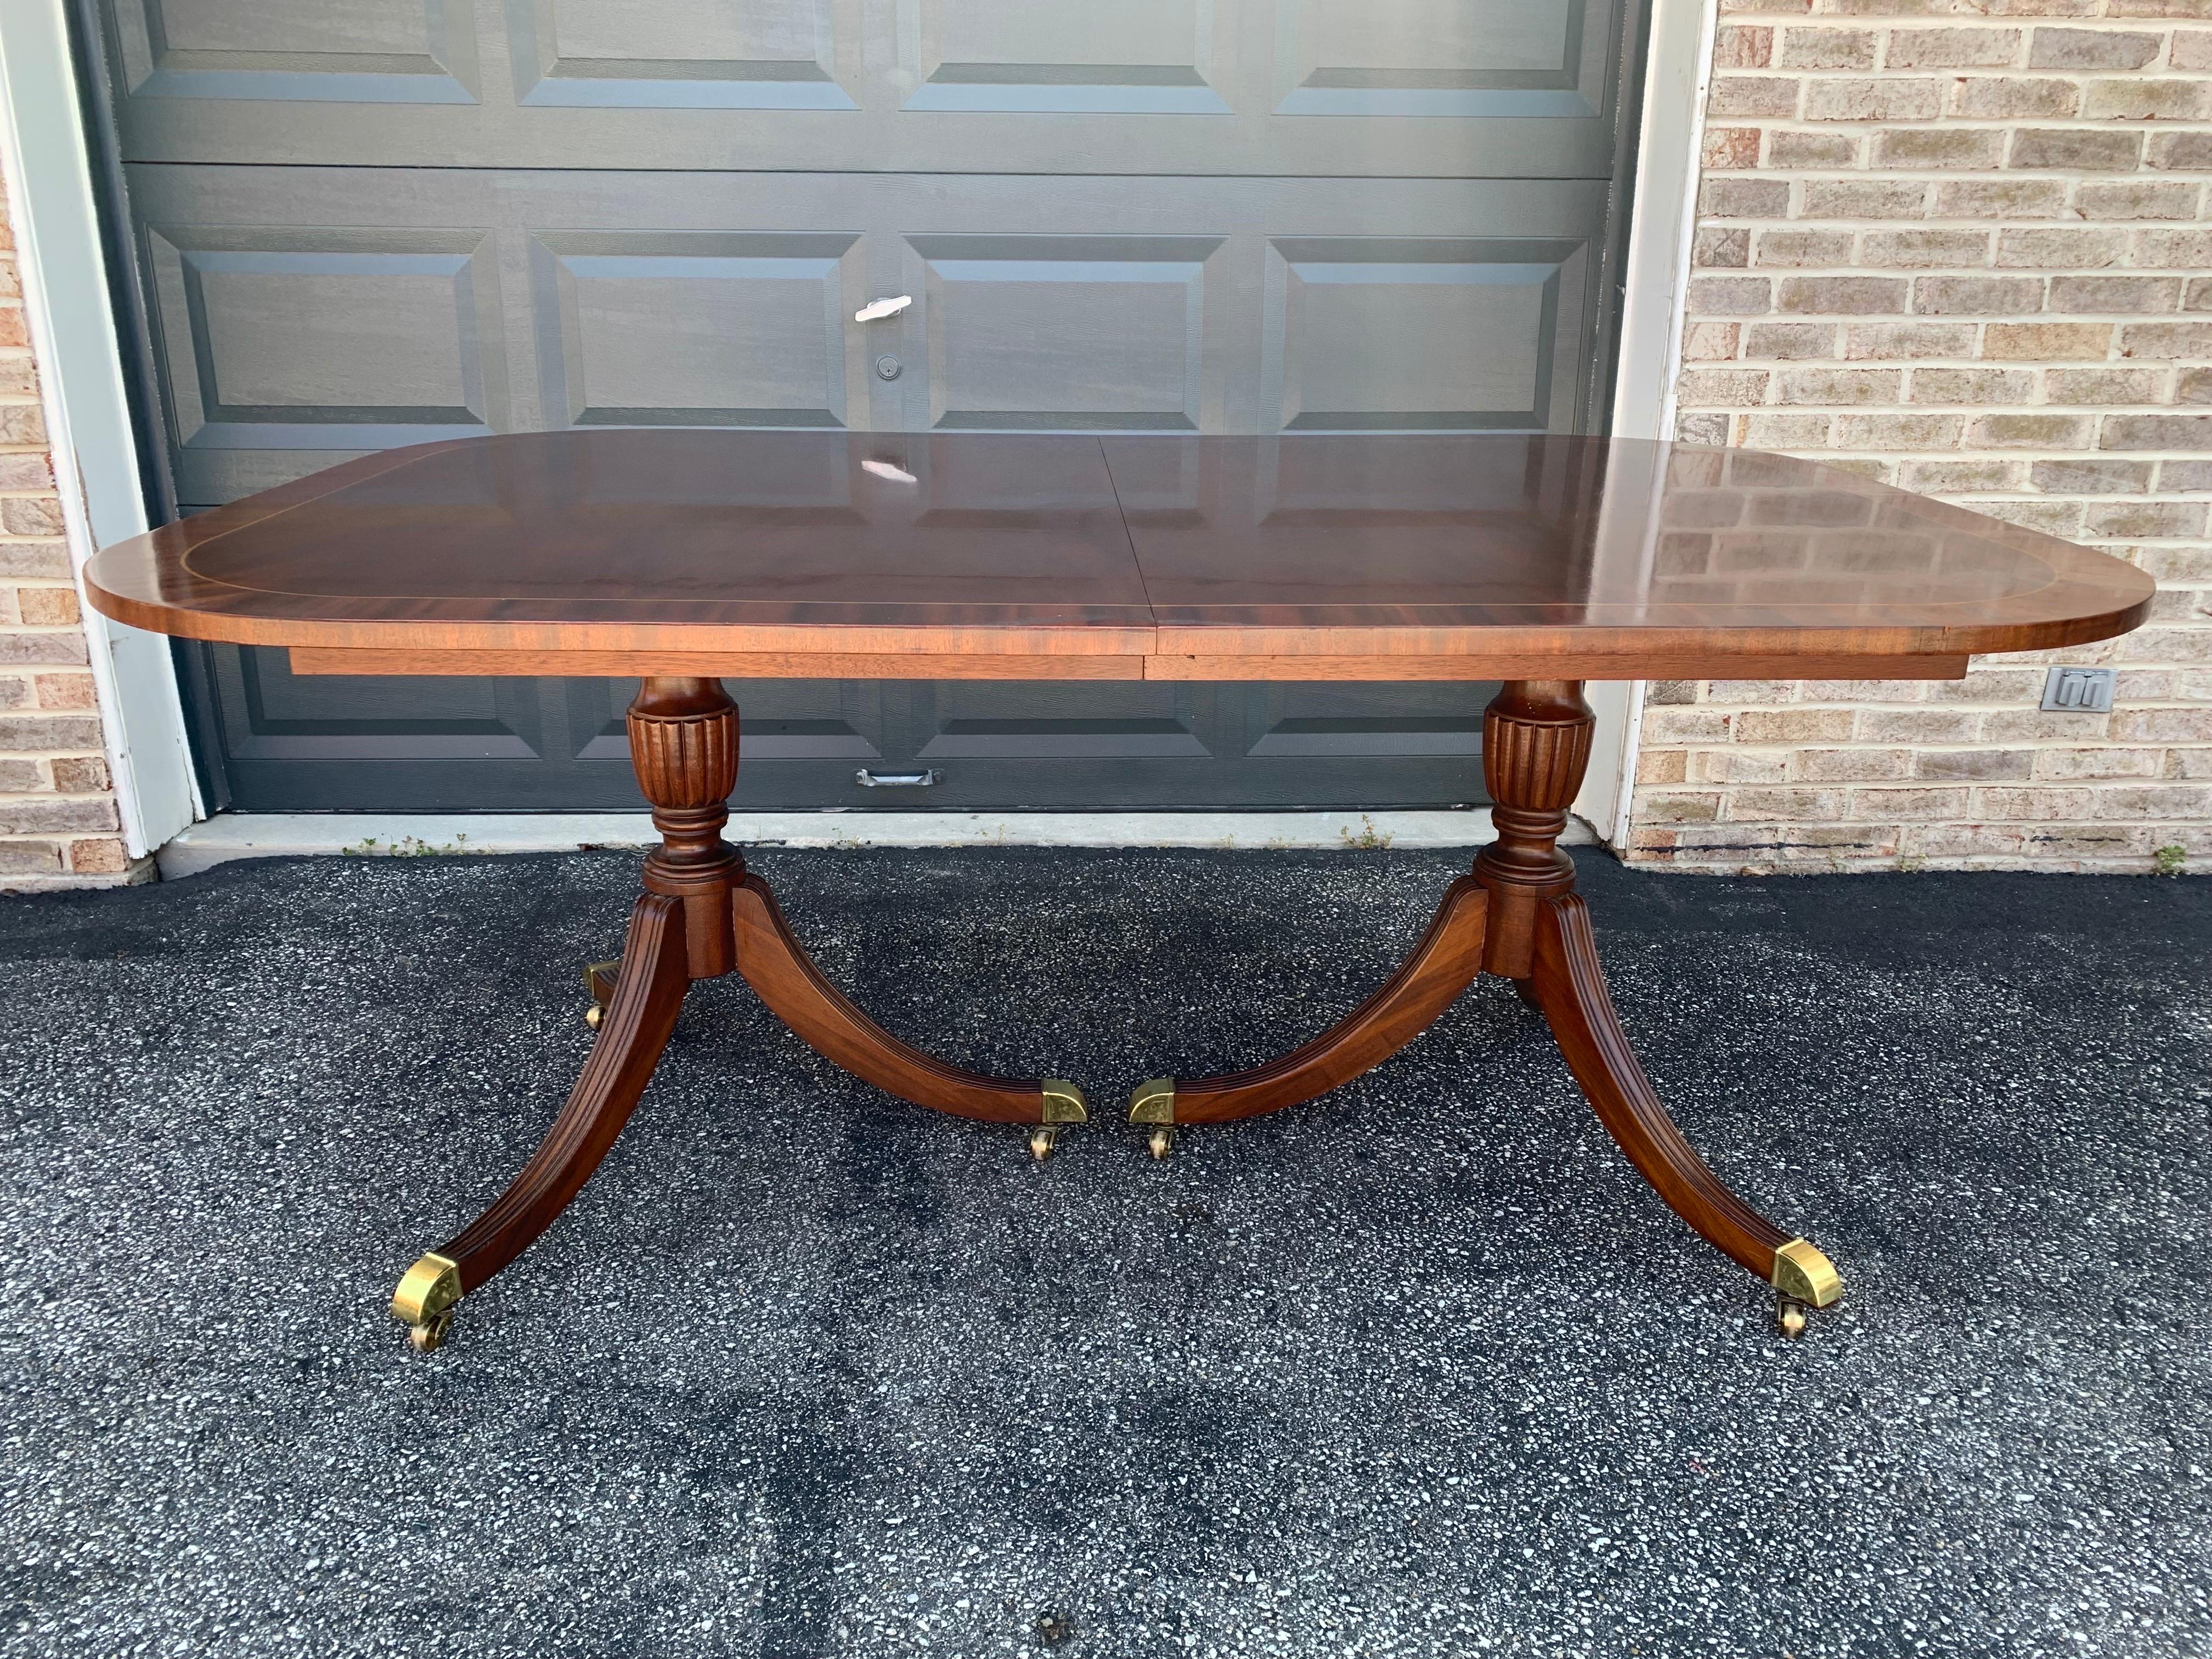 A gorgeous Georgian style double pedestal extension dining table manufactured by Councill Craftsman.

Beautiful mahogany with satinwood string inlay, carved solid mahogany pedestals, and brass-capped feet with original casters.

Measures: 68